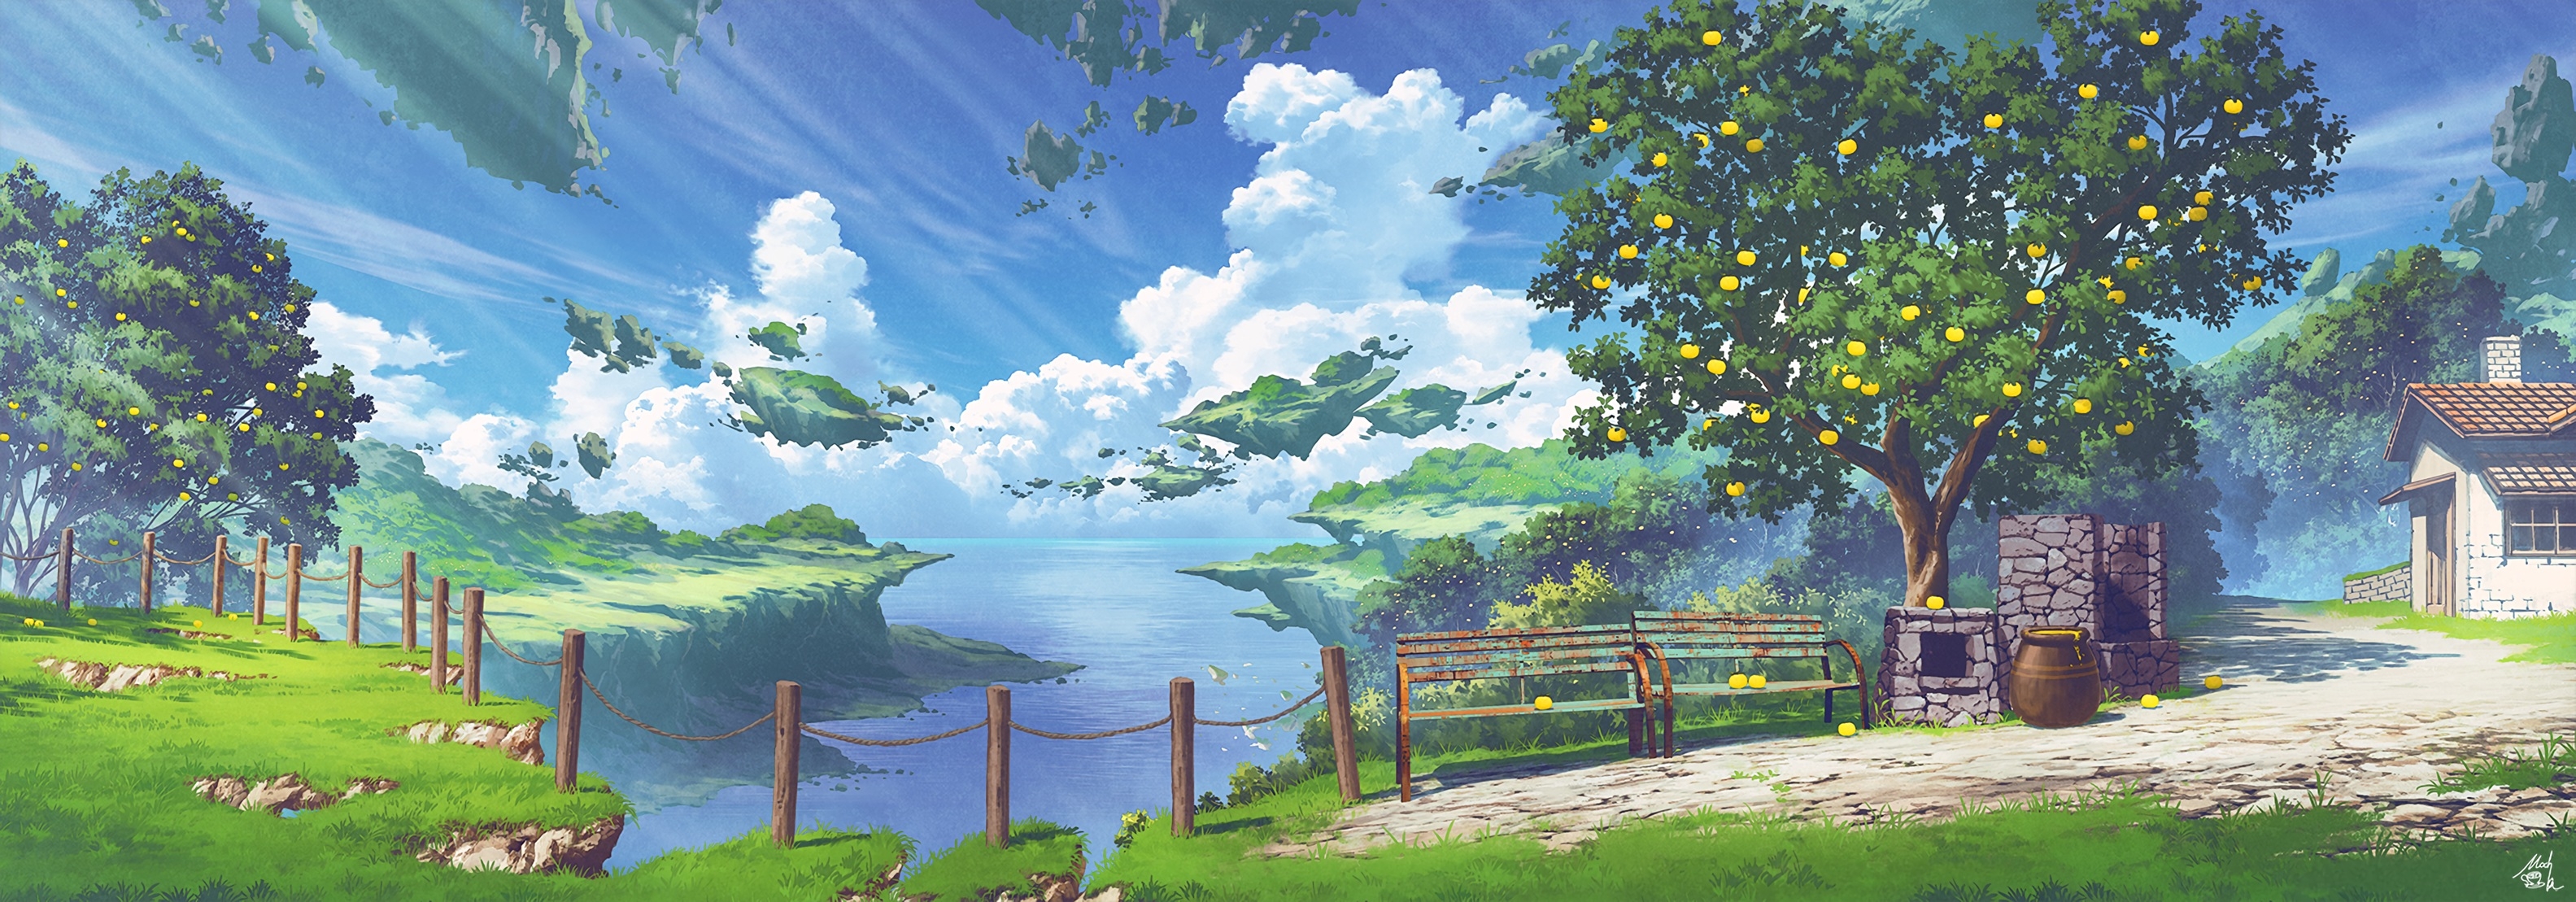 Anime Landscape Nature Sky Clouds Trees Bench Wallpaper -  Resolution:3167x1109 - ID:1246496 